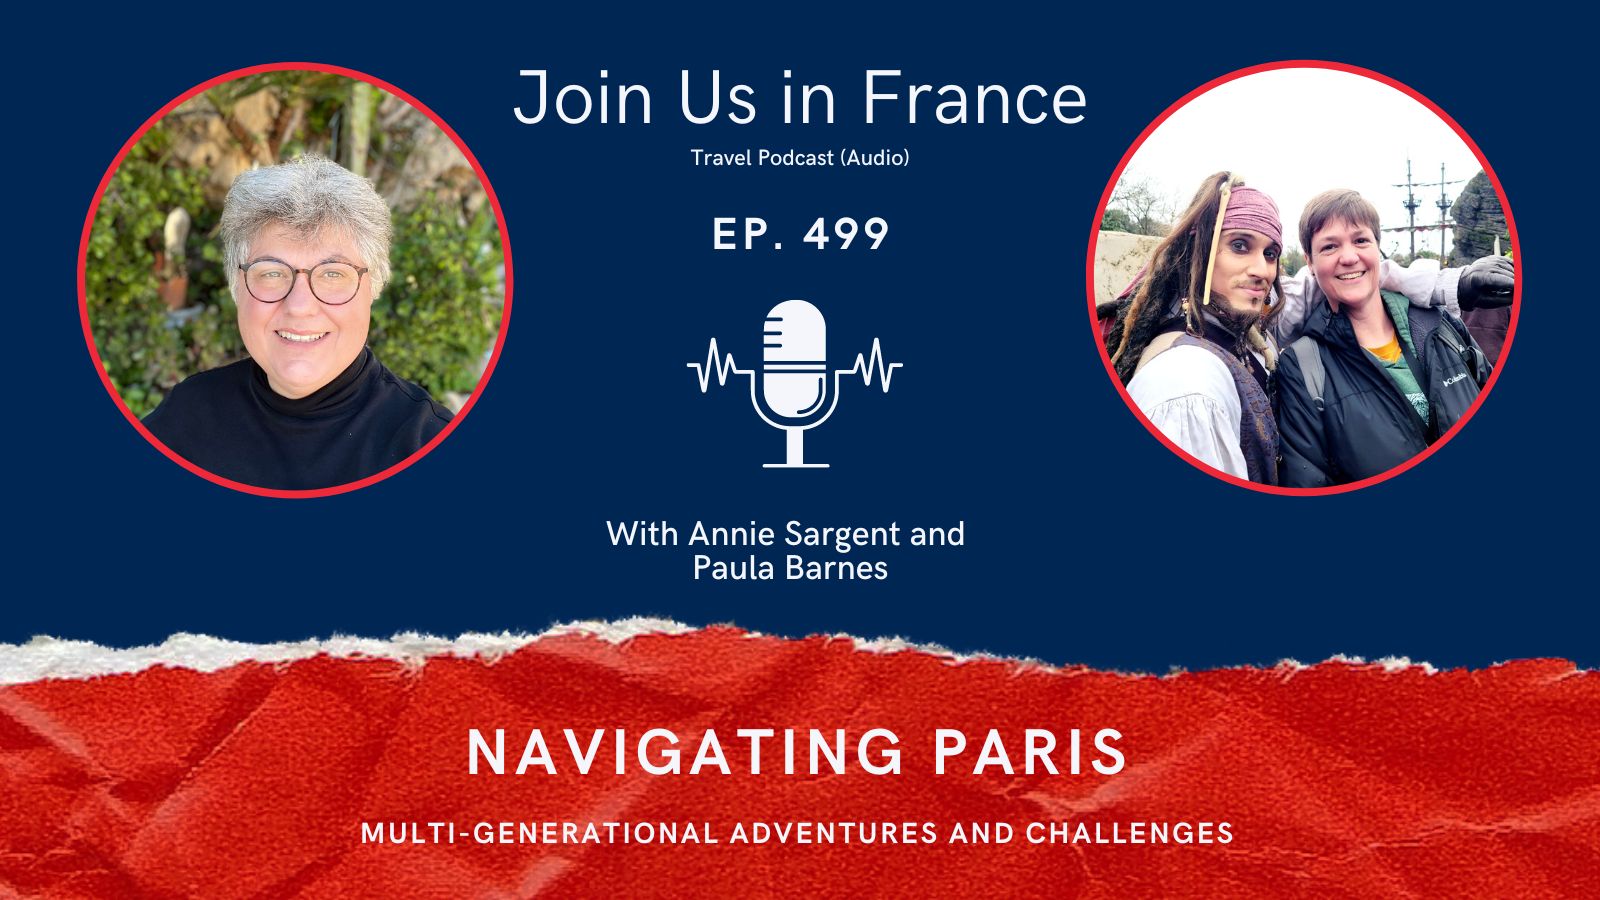 Navigating Paris with Paula Barnes, Episode 499 of Join Us in France Travel Podcast